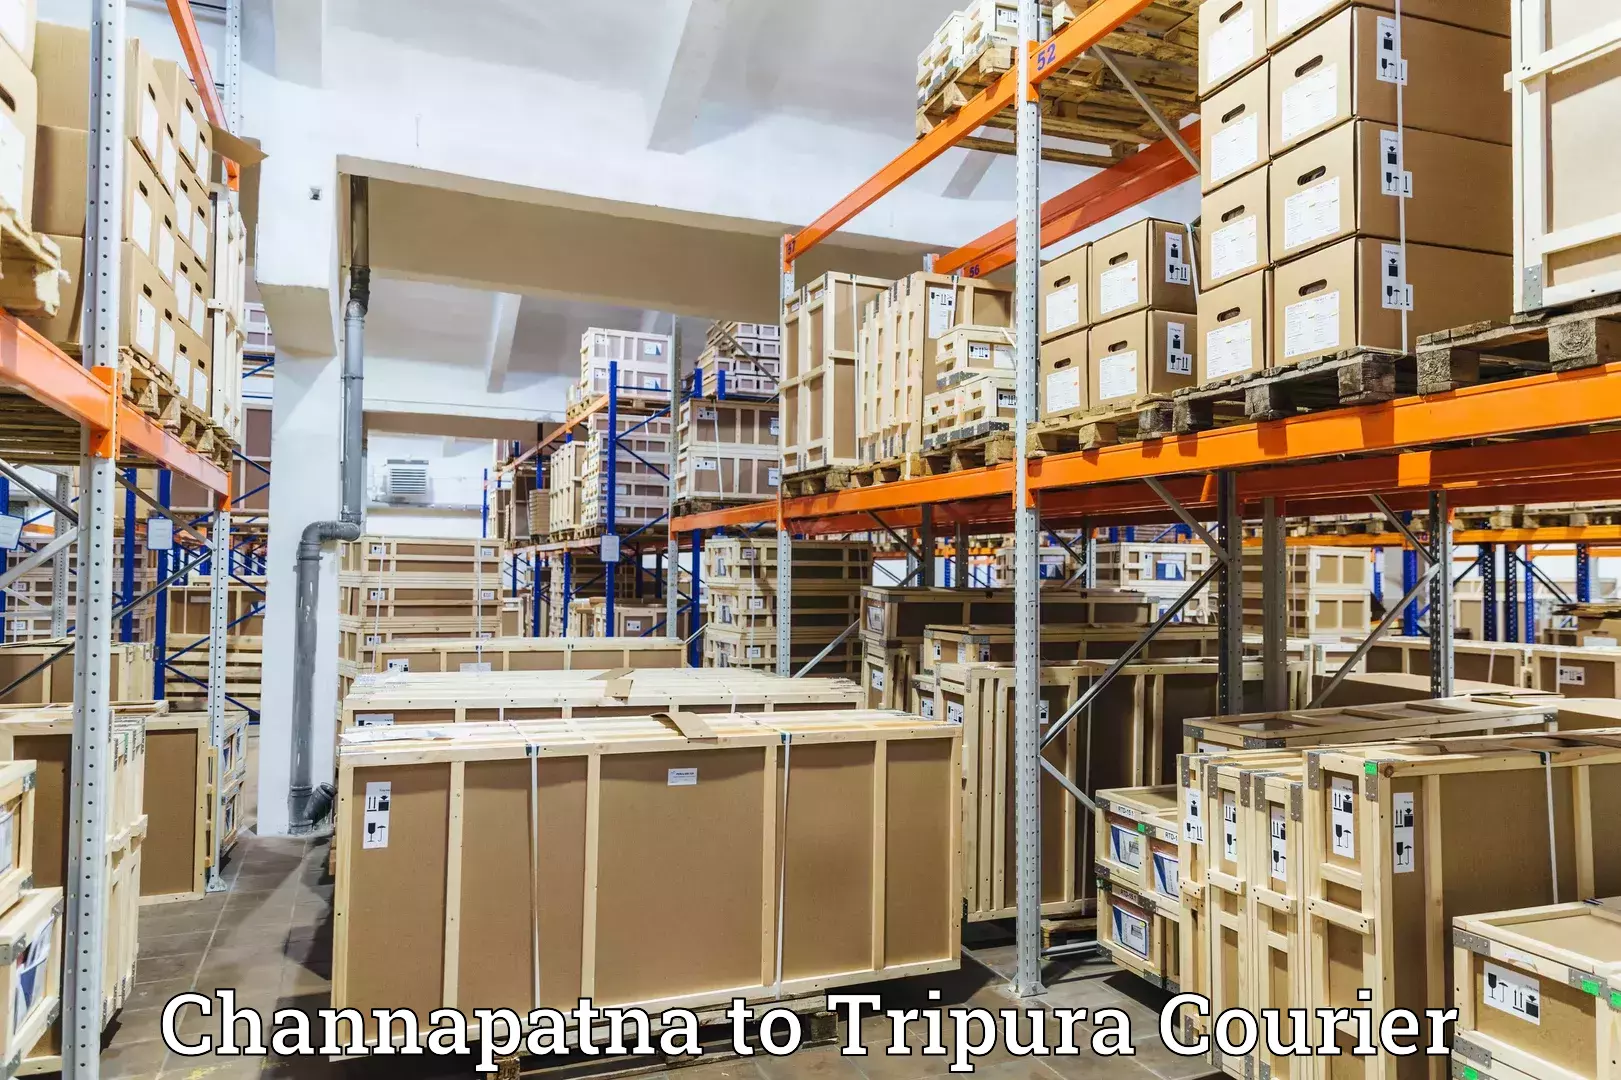 Express delivery capabilities Channapatna to Tripura